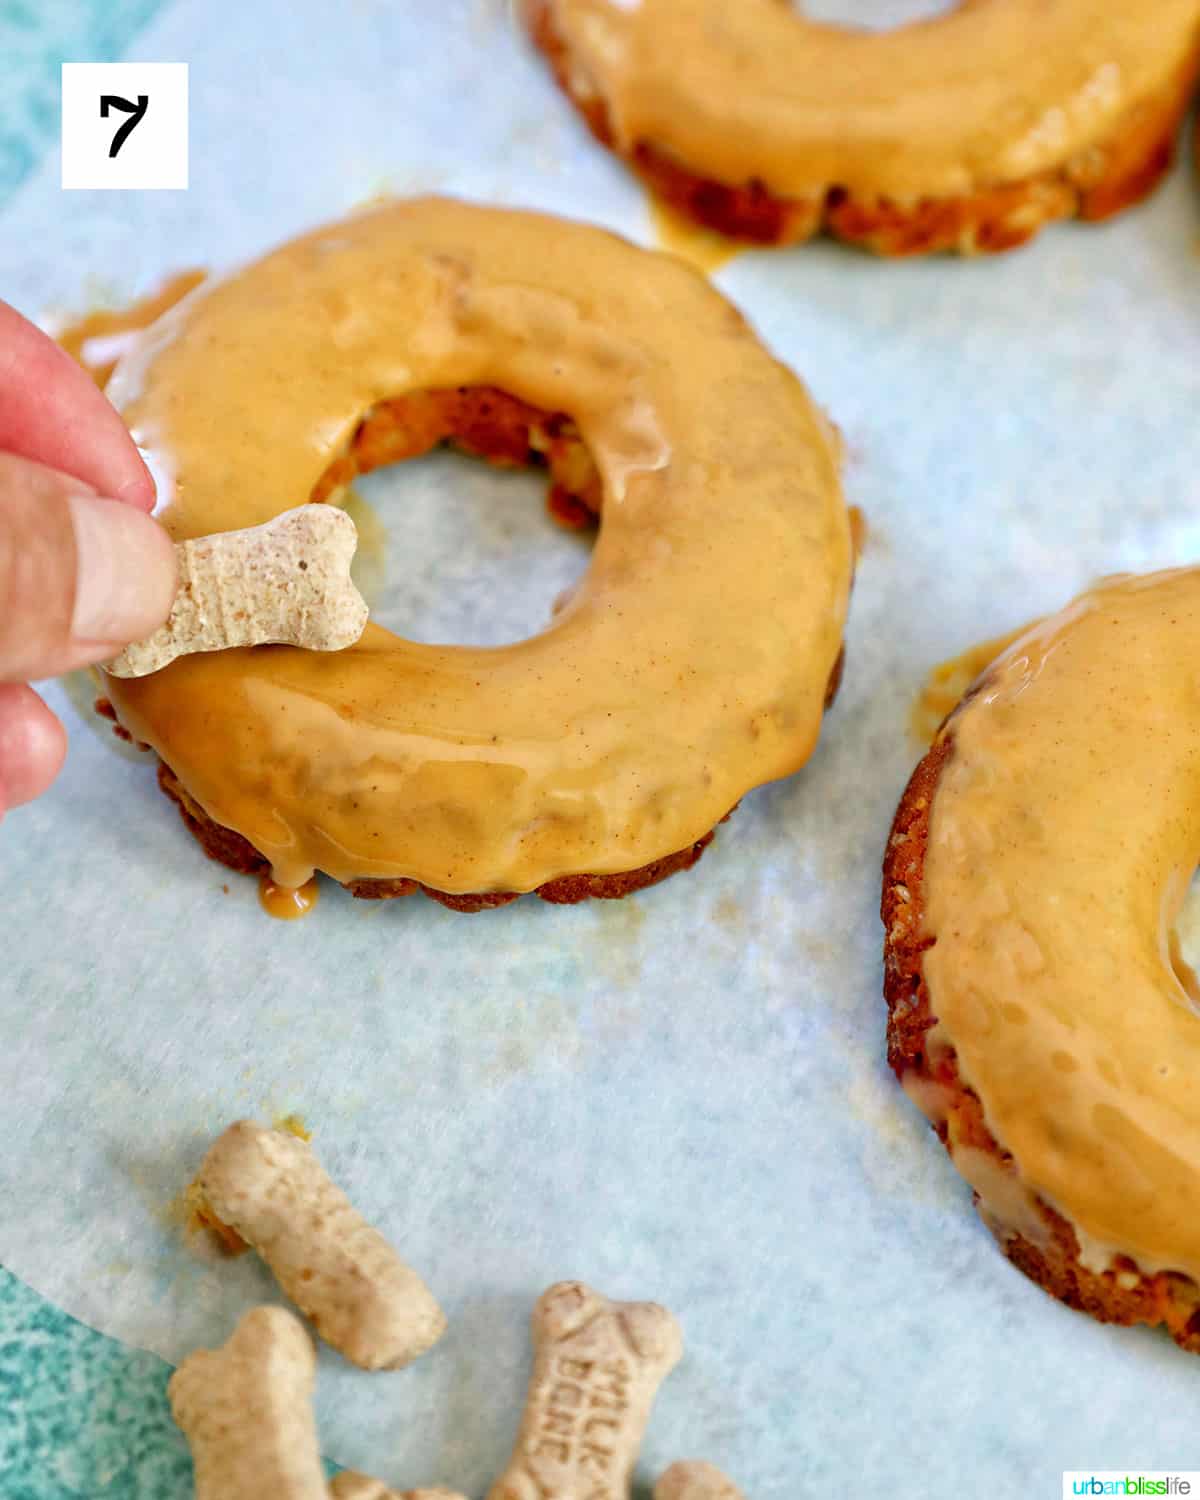 adding dog biscuits to dog donuts.